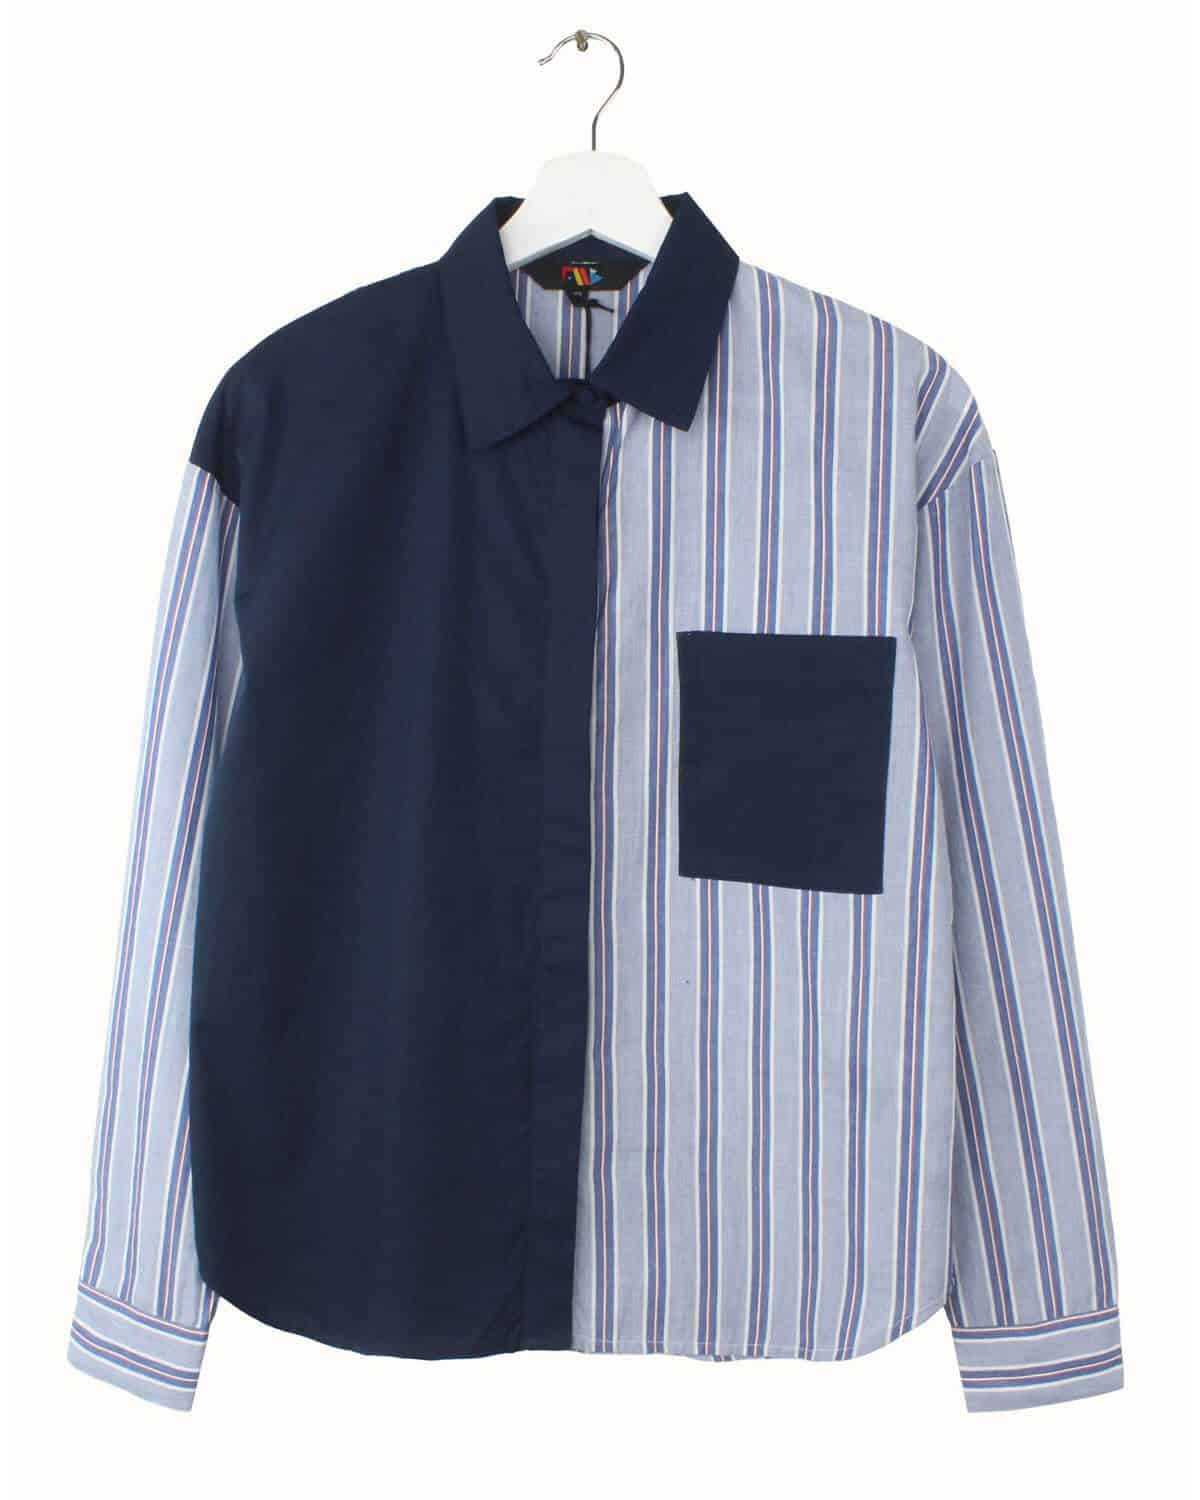 HUMI Two Tone Layered Office Work Career Collared Shirt with 3/4